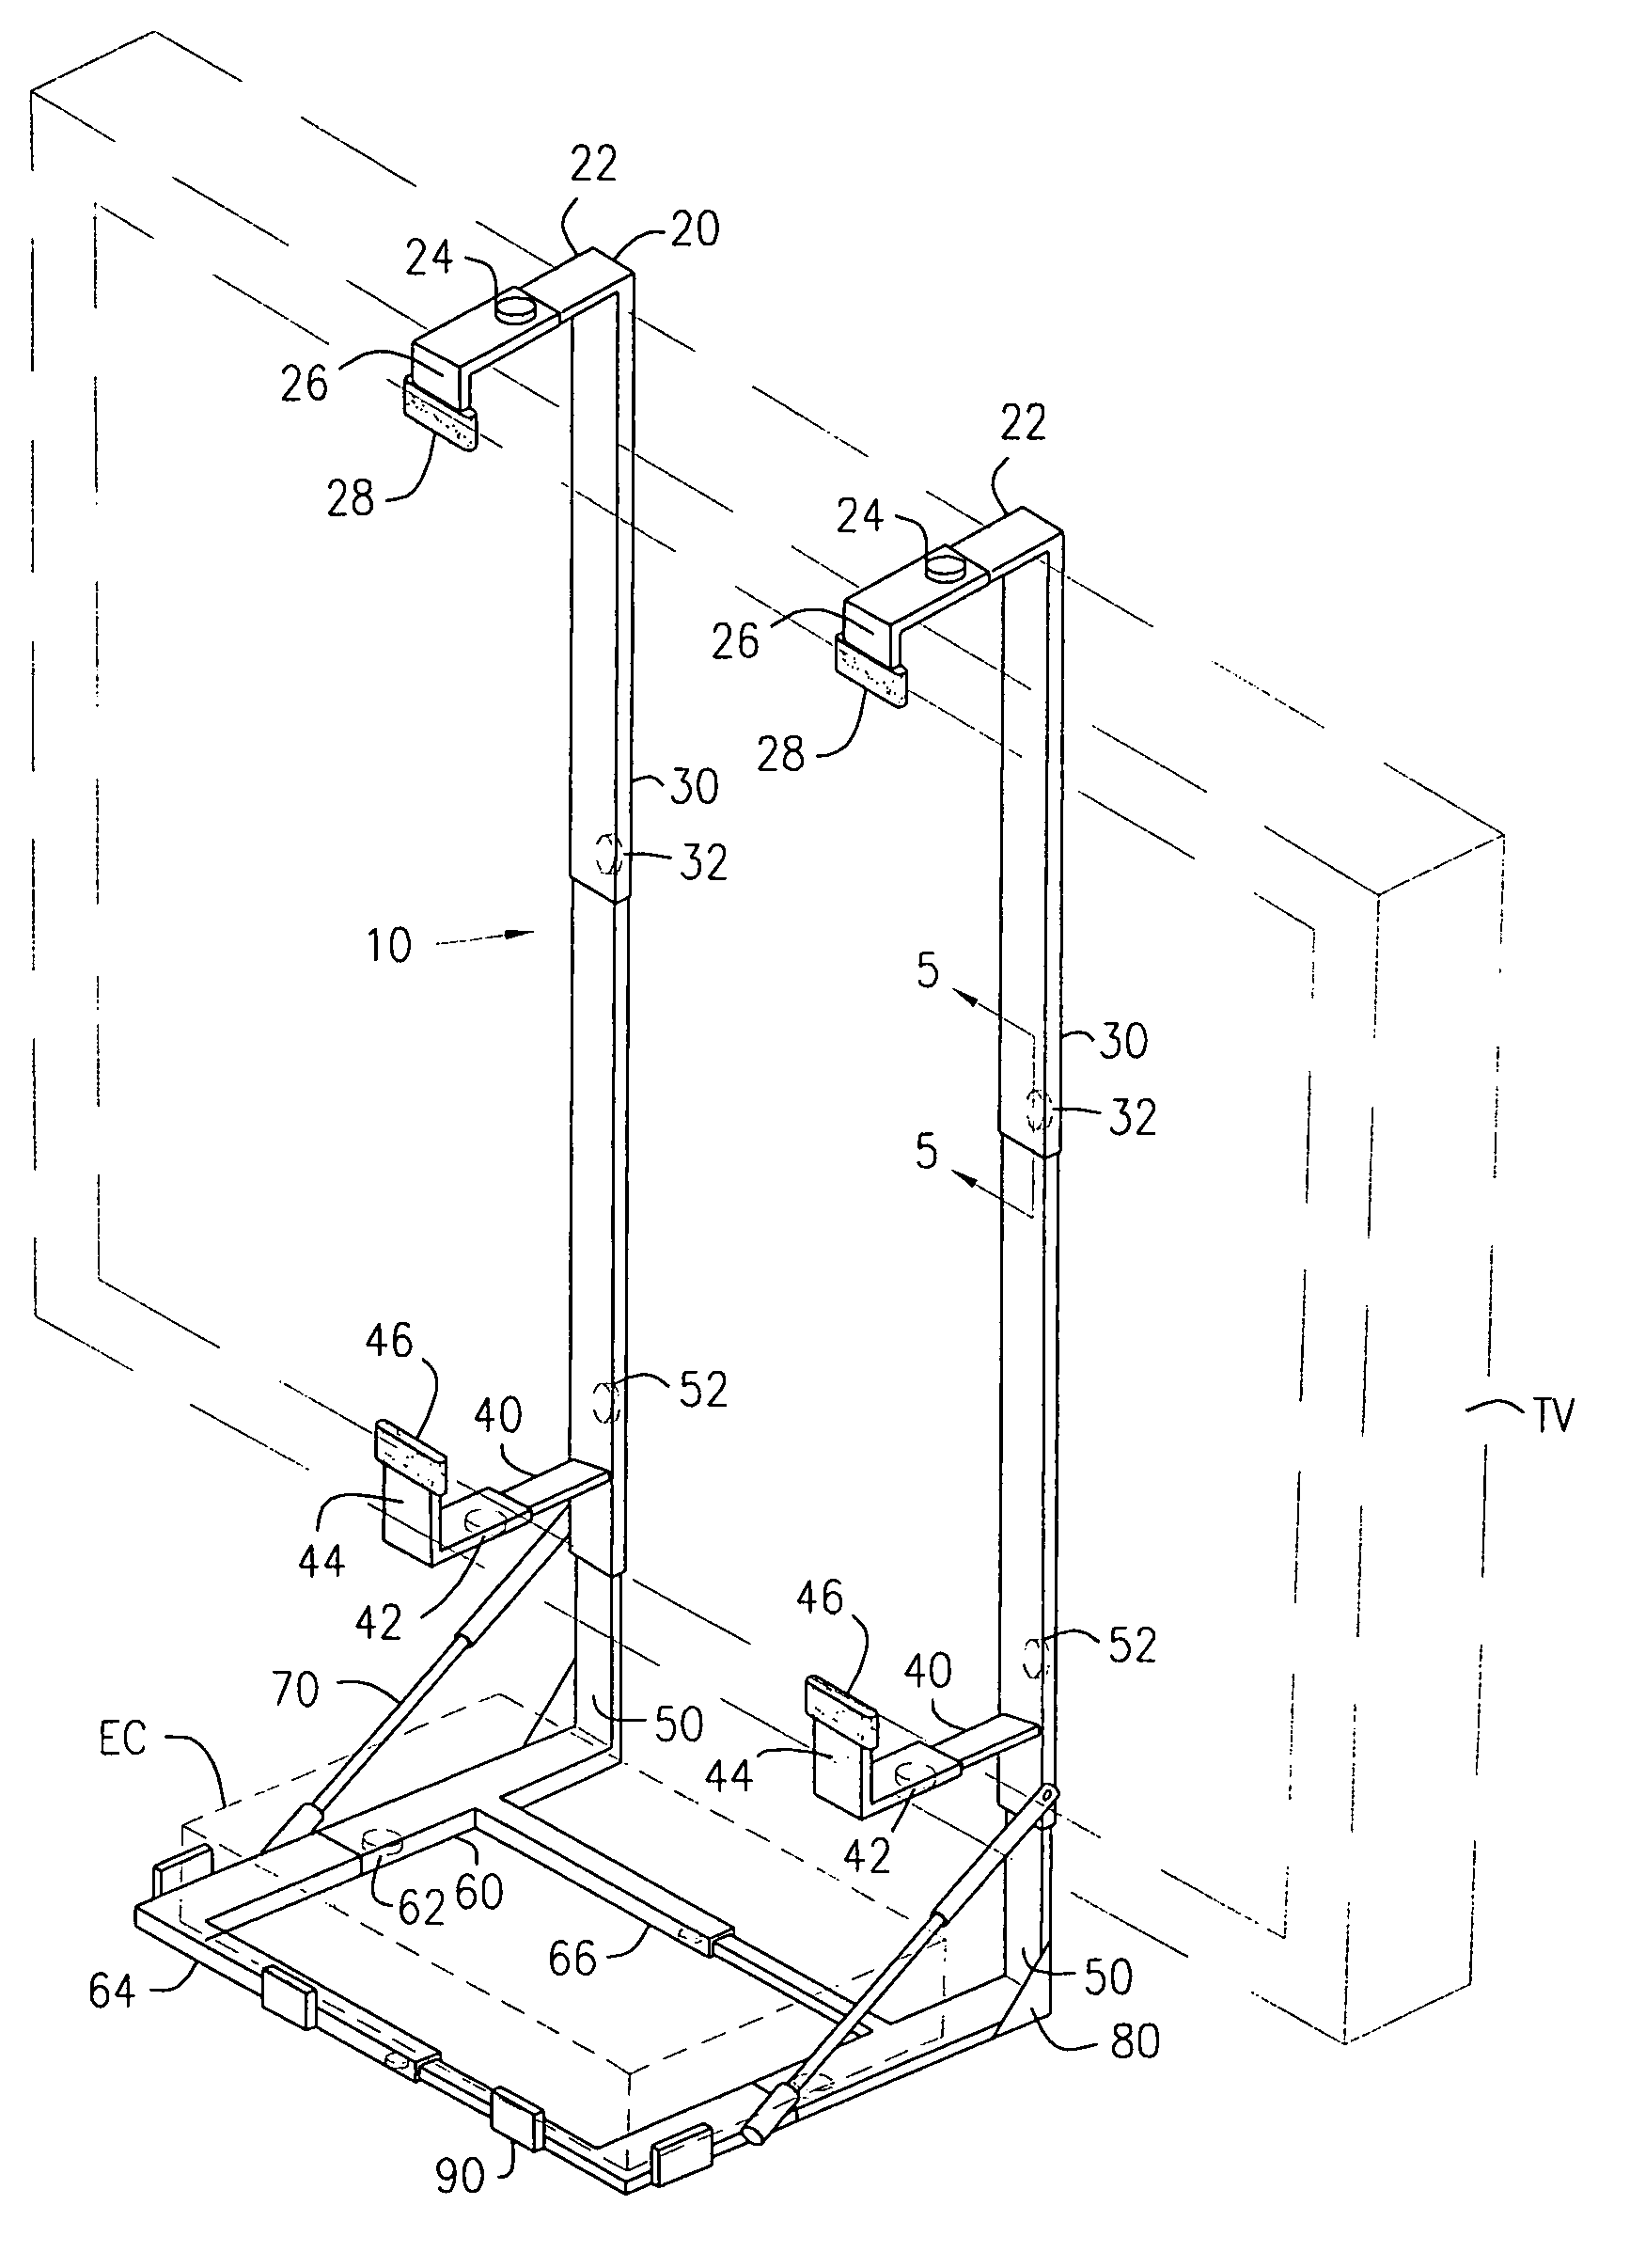 Device for attaching electronic components to flat-screen television